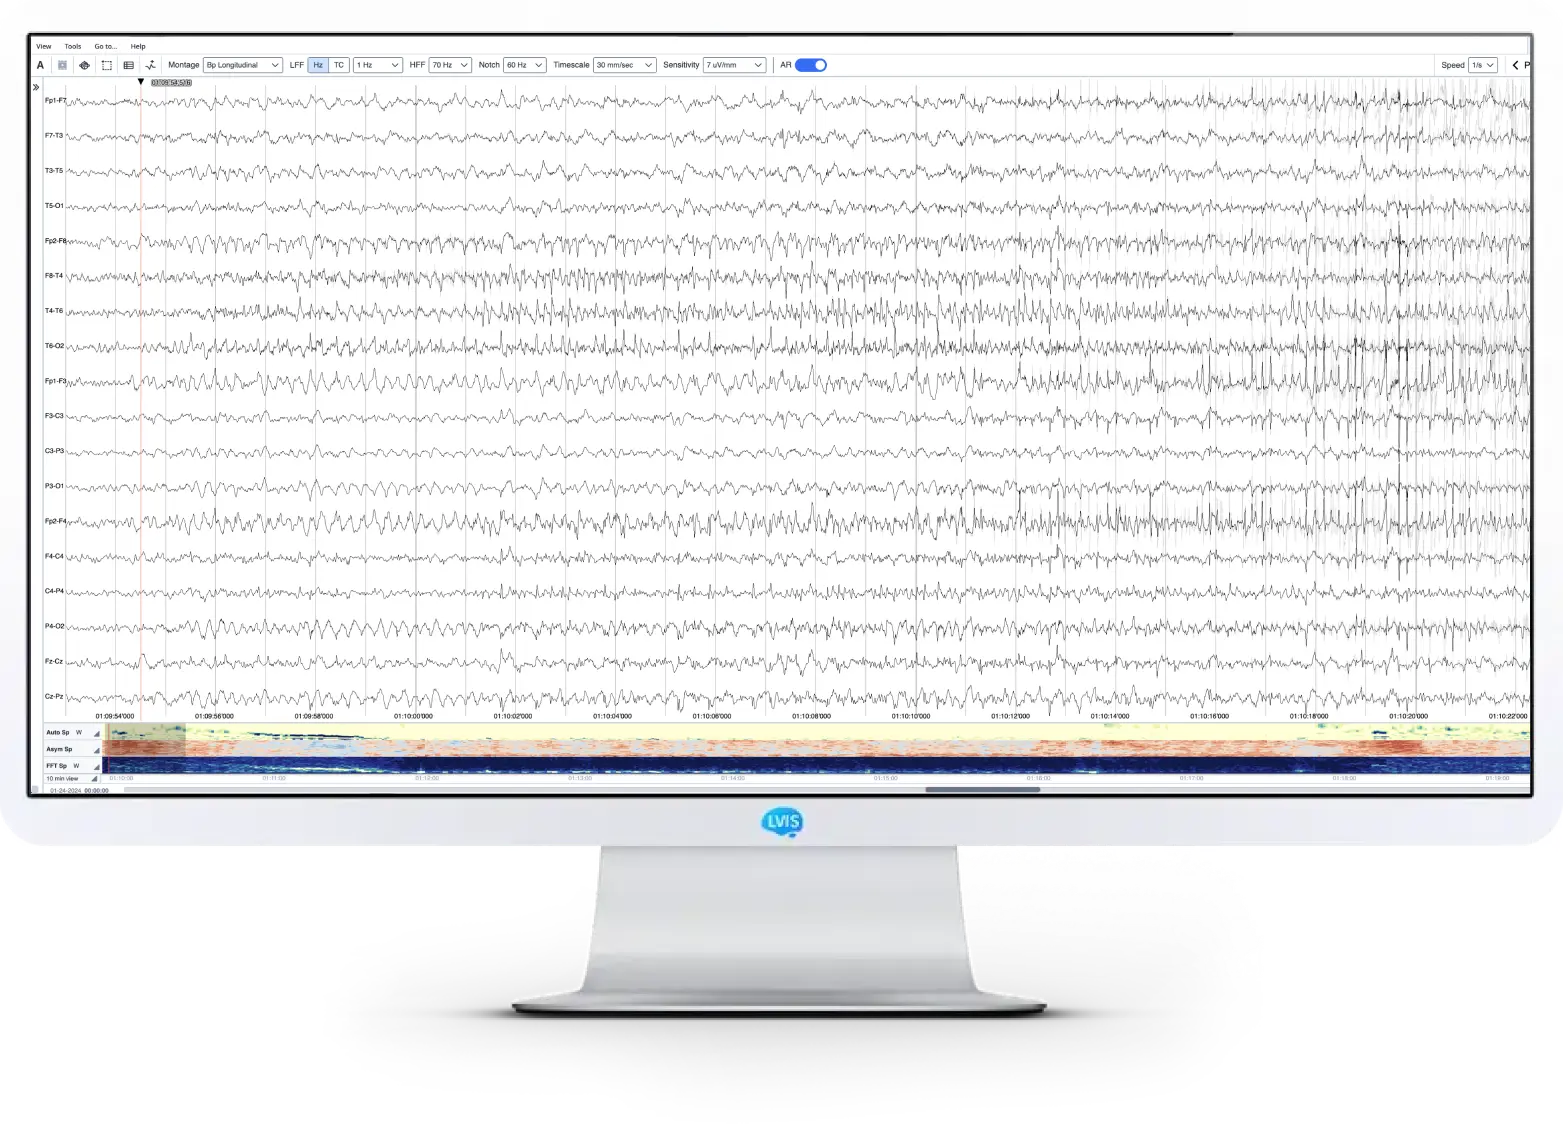 Monitor showing NeuroMatch software